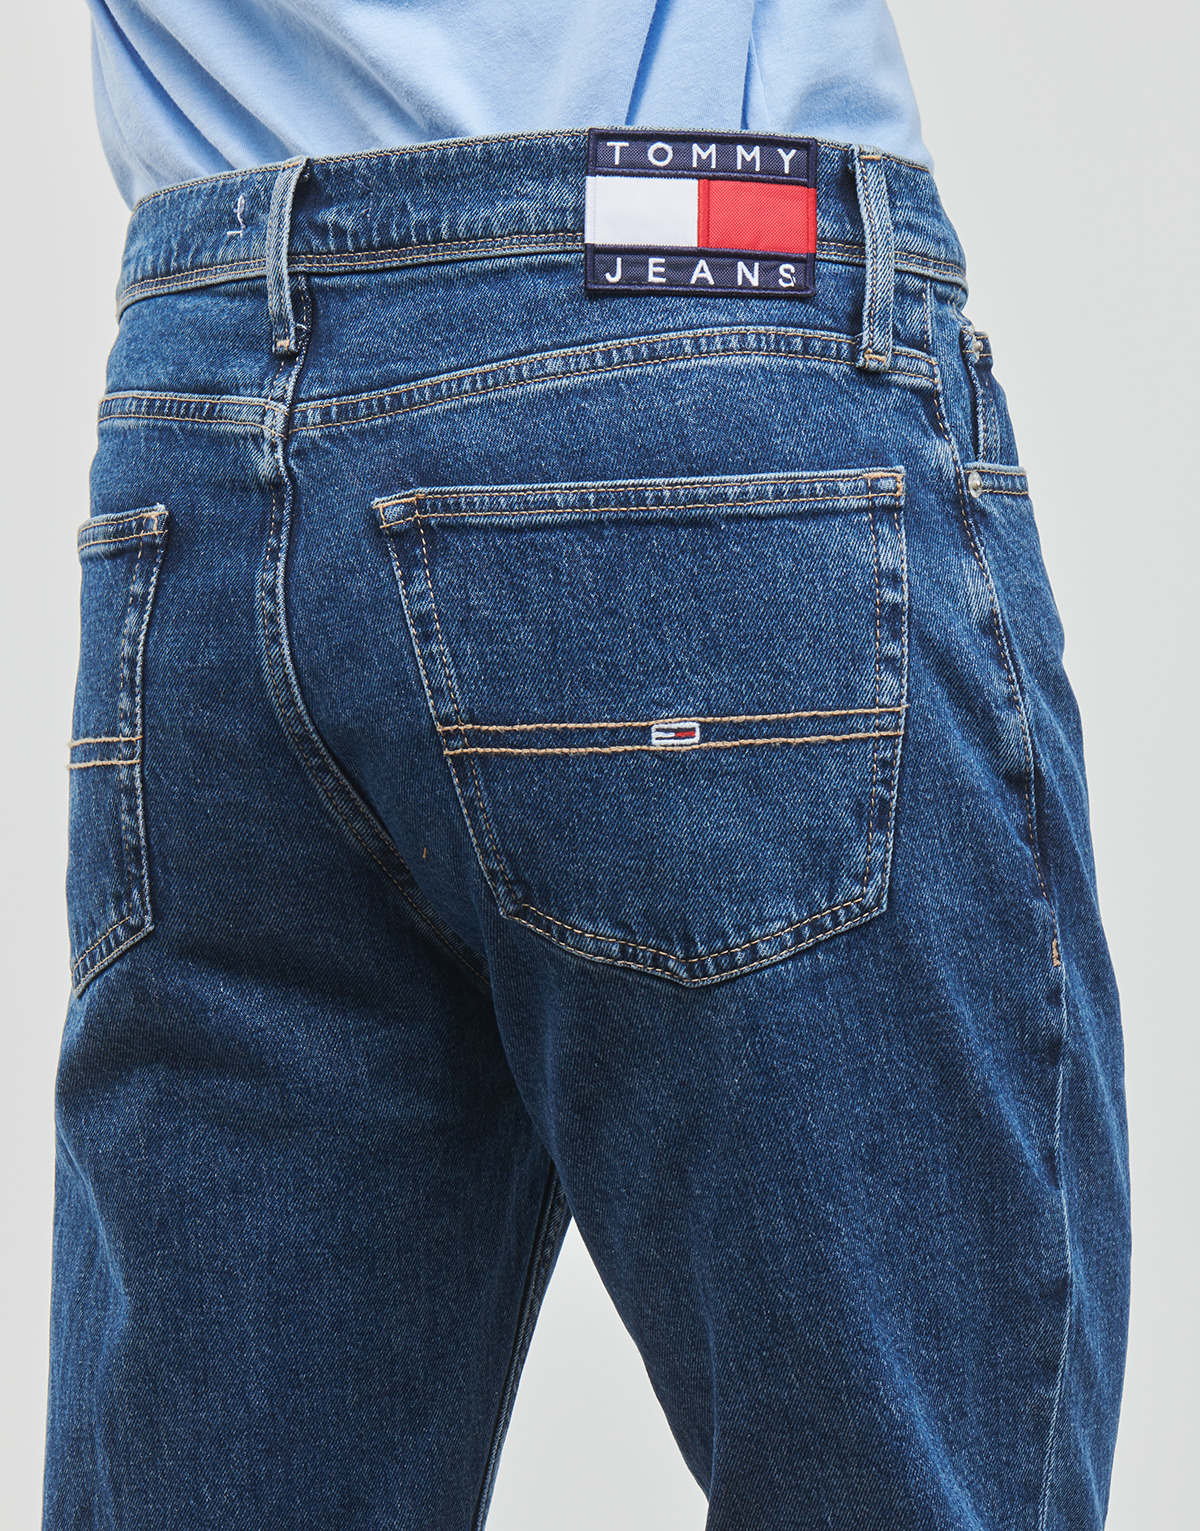 Tommy Jeans Bleu ETHAN RLXD STRGHT AG6137 crHPvq6x